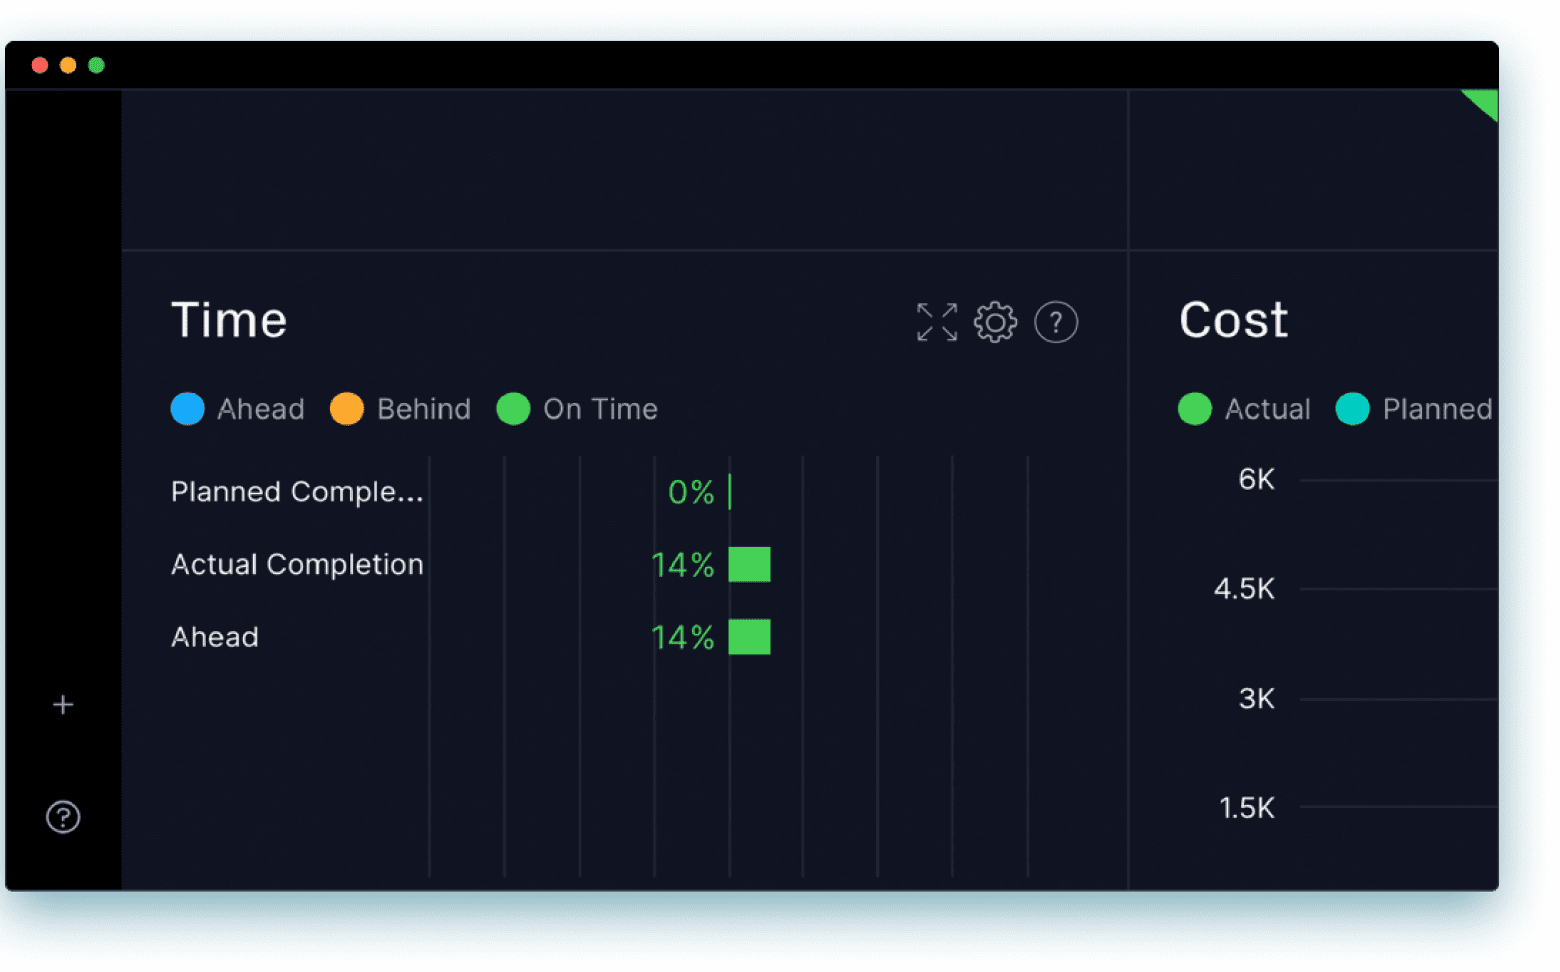 Project time management tool with dashboards